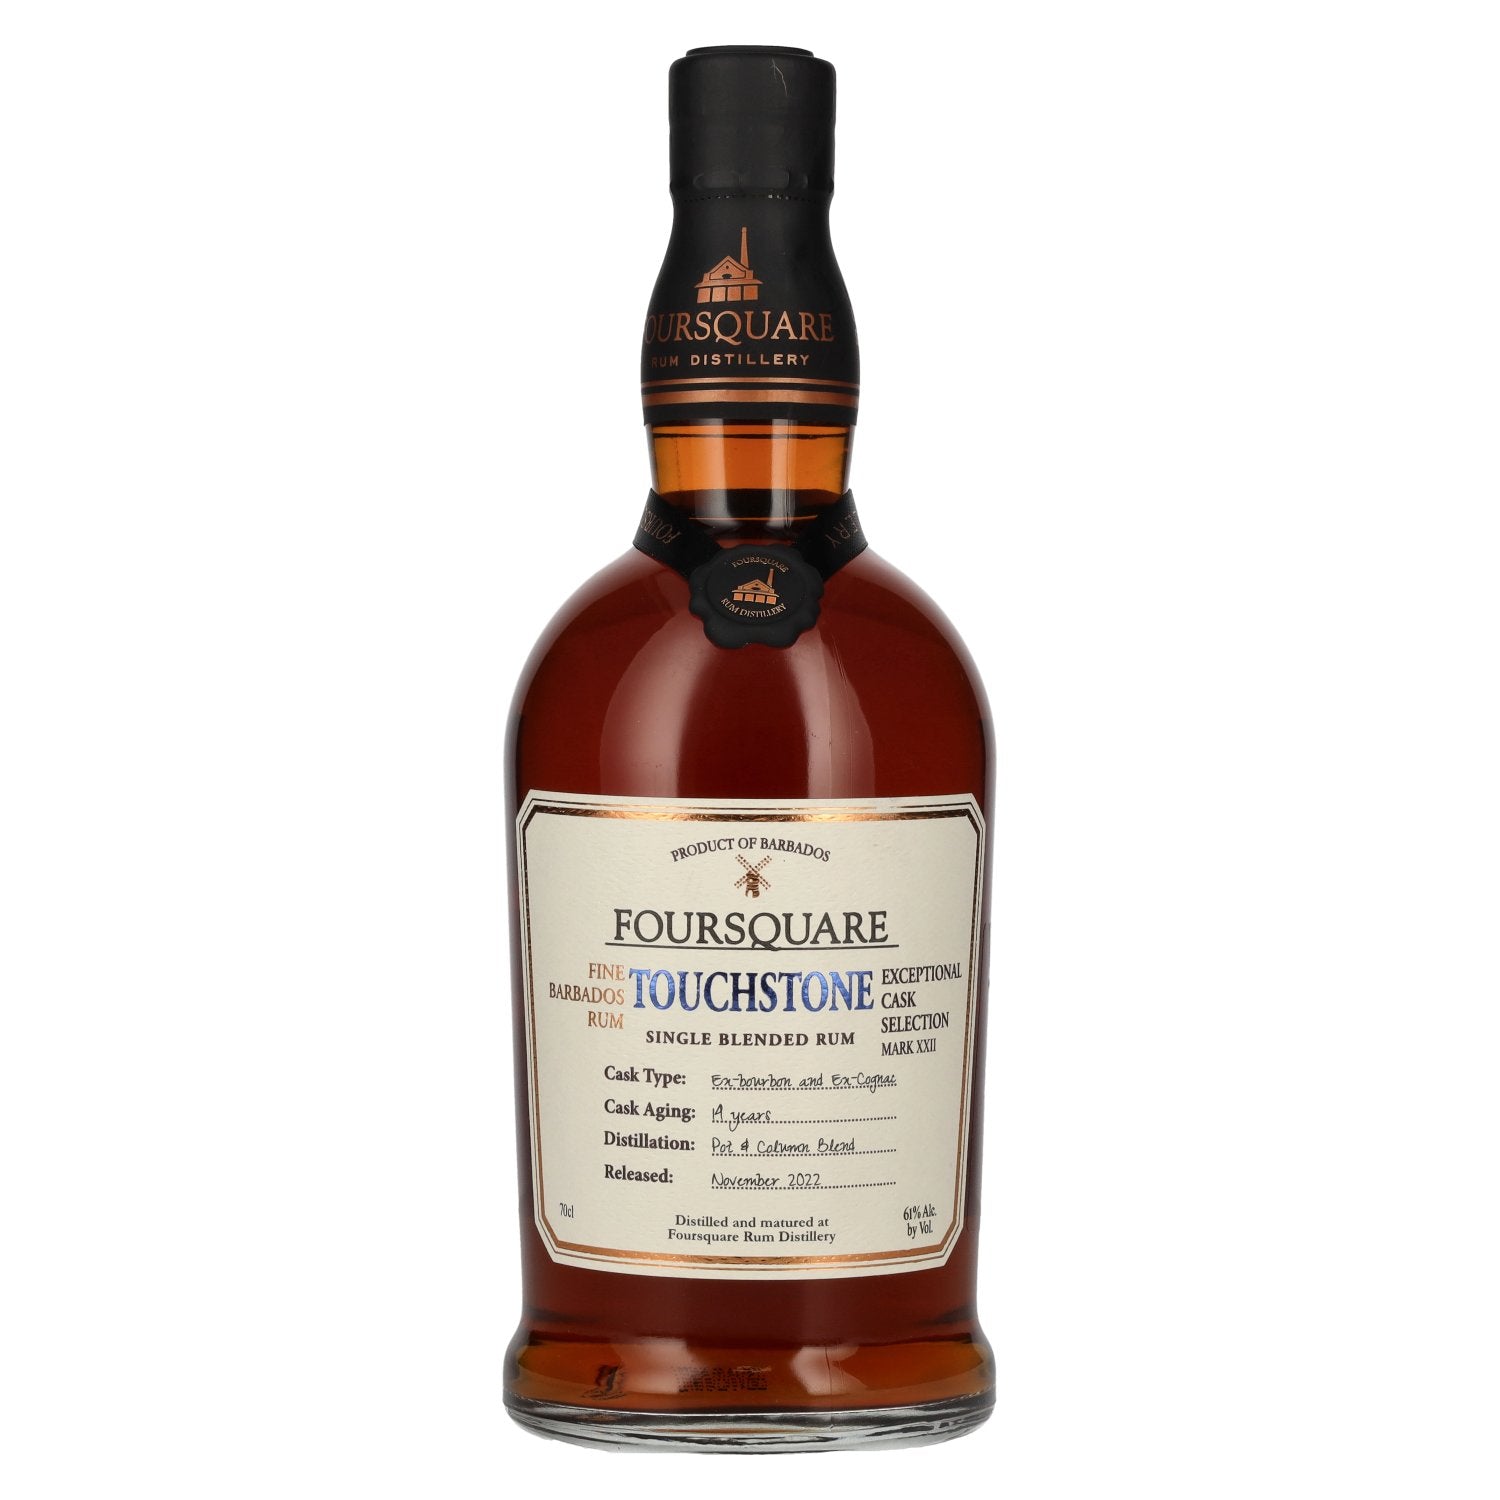 Foursquare 14 Years Old TOUCHSTONE Single Blended Rum 61% Vol. 0,7l